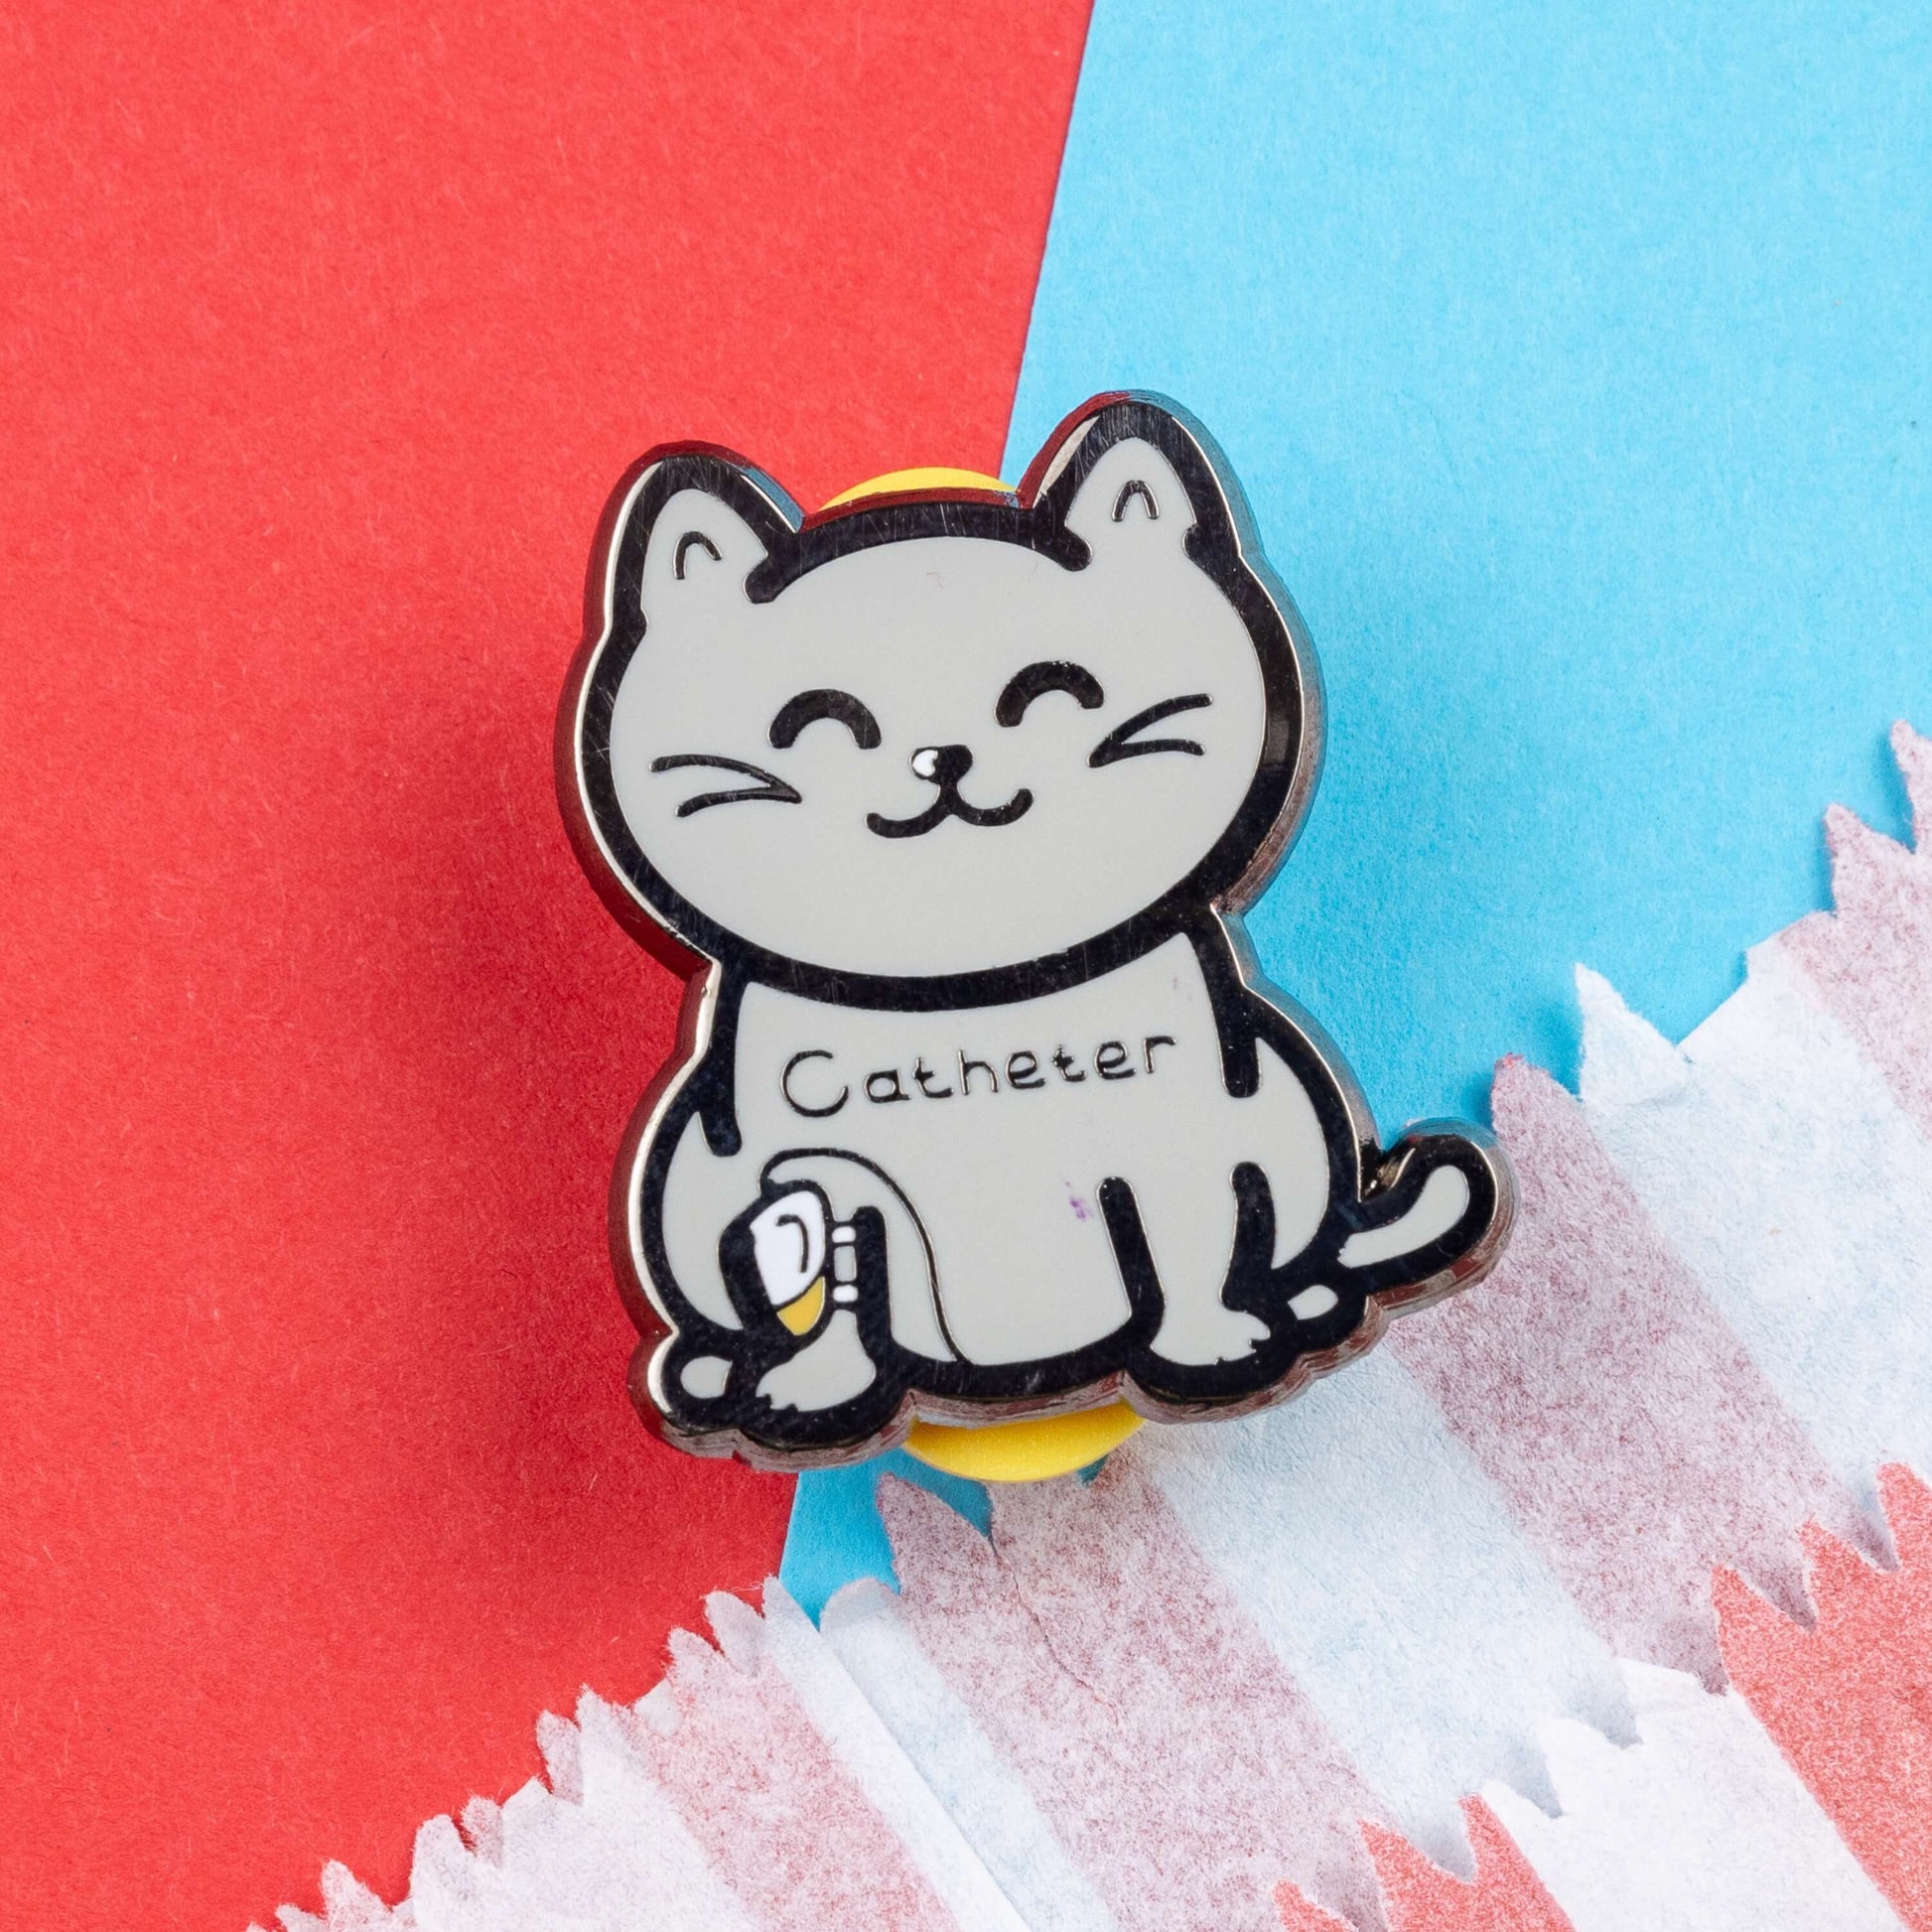 The Catheter Enamel Pin - Catheter on a red and blue card background. The pin is a grey smiling cat sat down with a urine drainage Urostomy pouch strapped to its right leg and text across its chest reading 'catheter'. The pin is designed to raise awareness for bladder problems such as UTIs and other chronic illnesses.